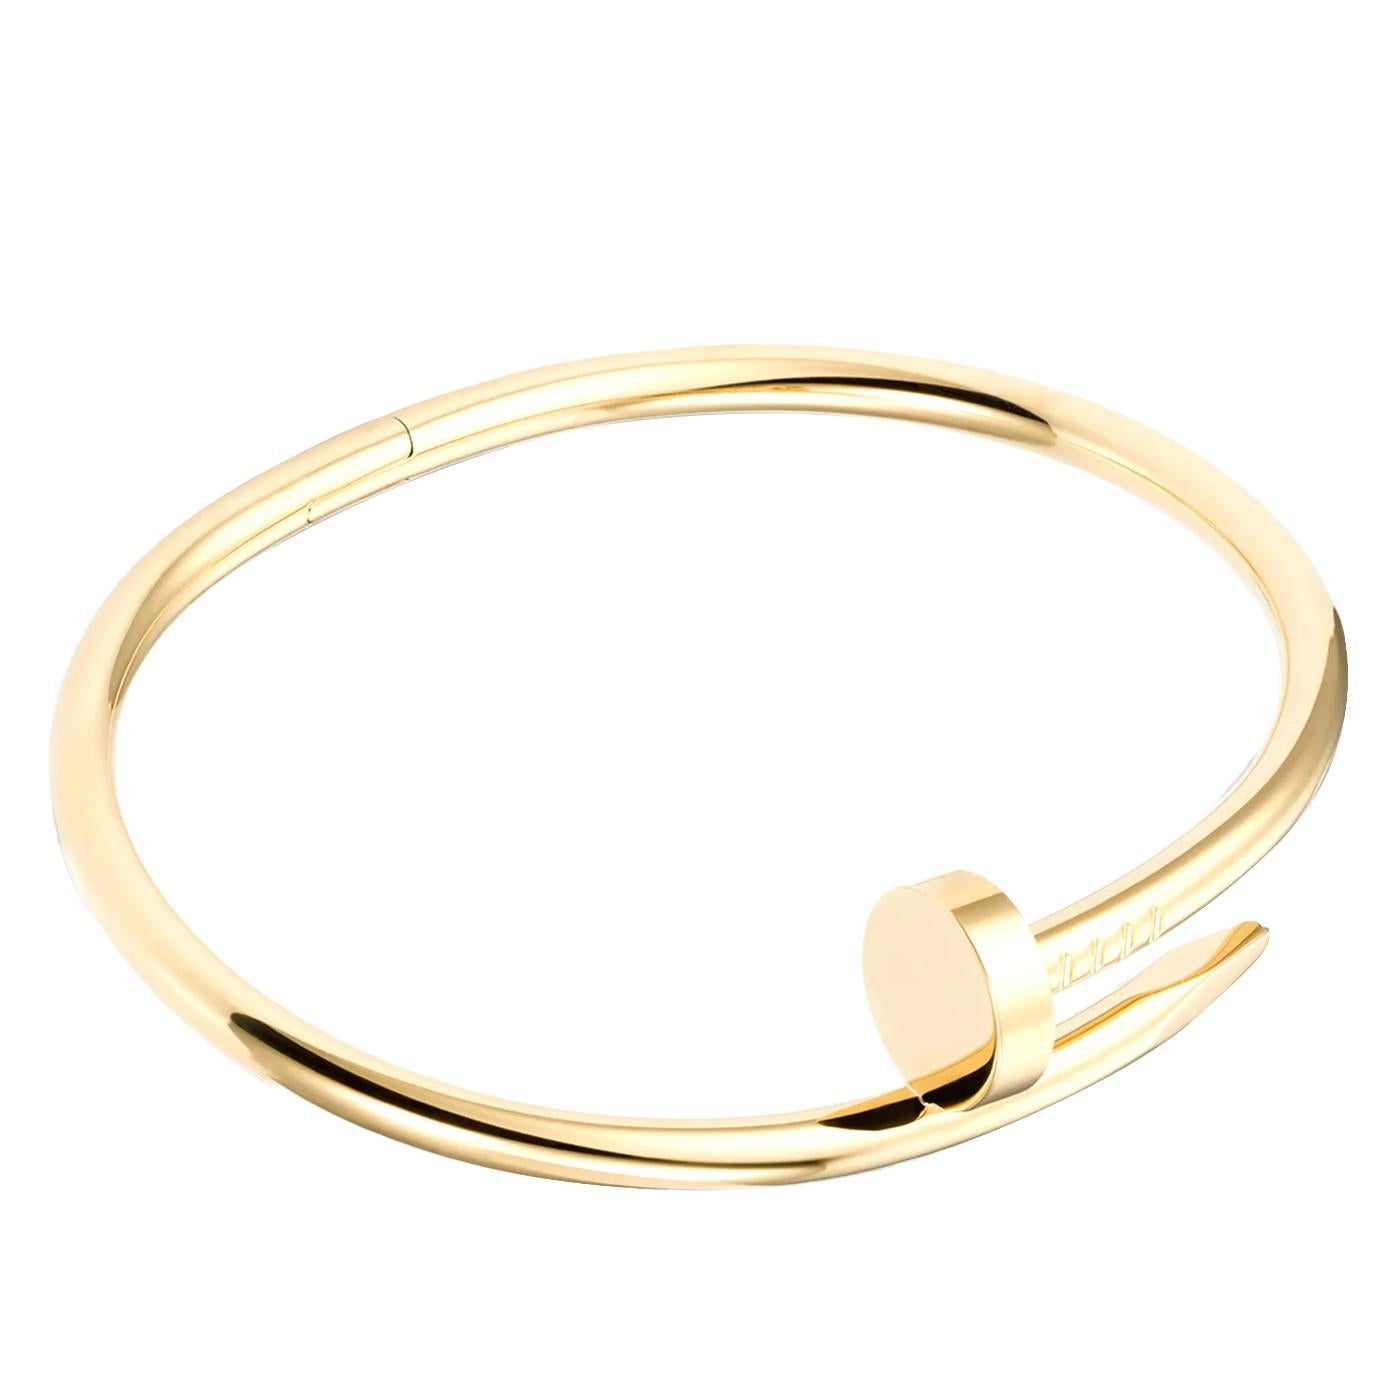 Cartier Juste un Clou bracelet, Classic, 18K yellow gold (750/1000). Width: 3.5 mm (for size 16).

Details:
Brand: Cartier
Type: Juste un Clou Bracelet
Material: 18K Yellow Gold
Size: 16
Theme: Romantic, Love
Scope of Delivery: Box and